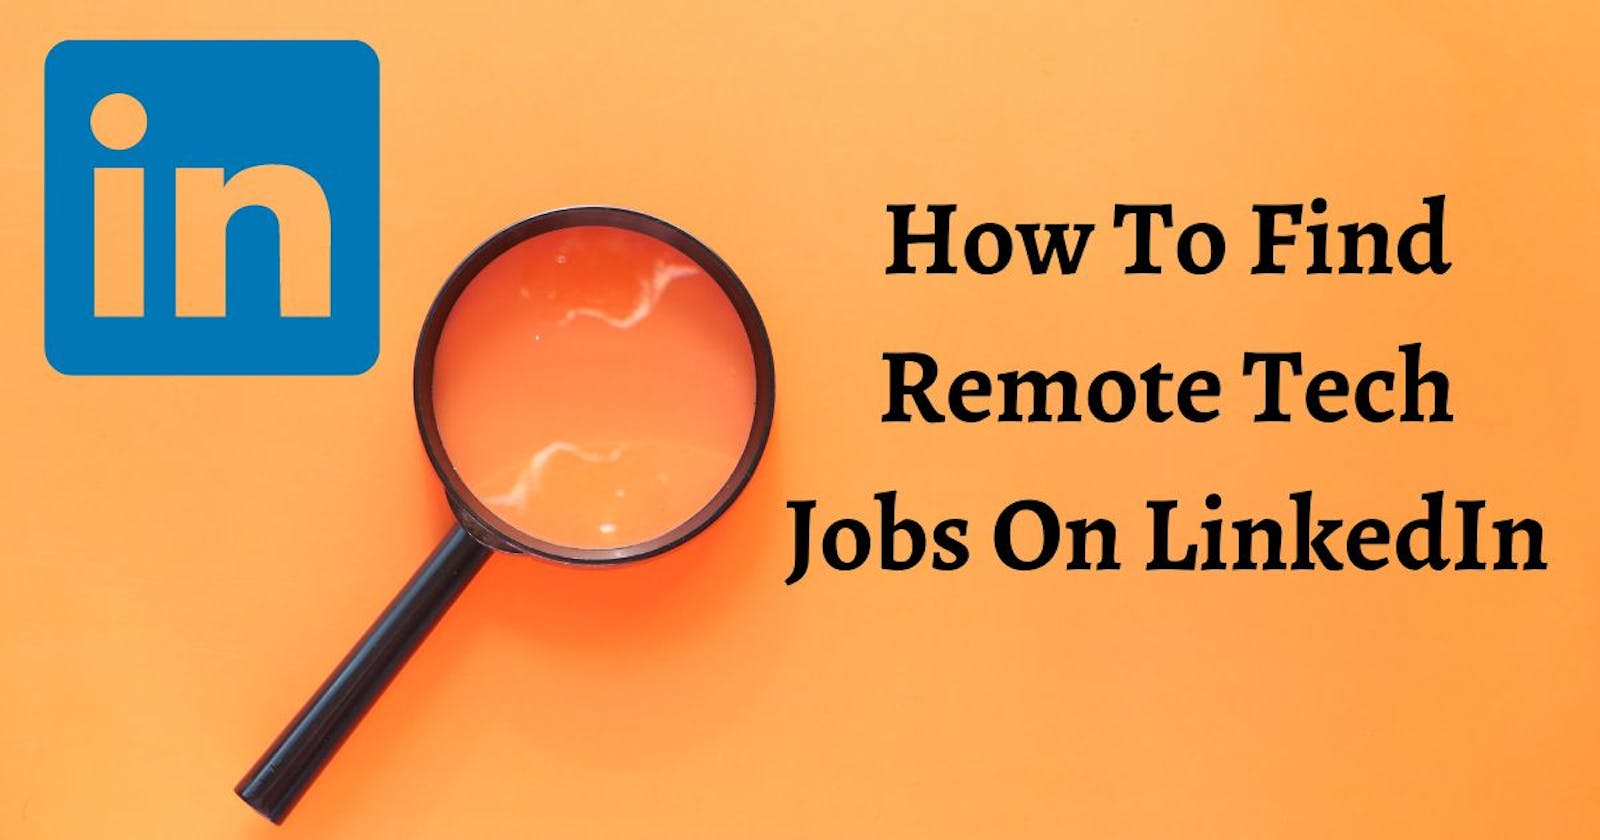 How To Find Remote Tech Jobs On LinkedIn